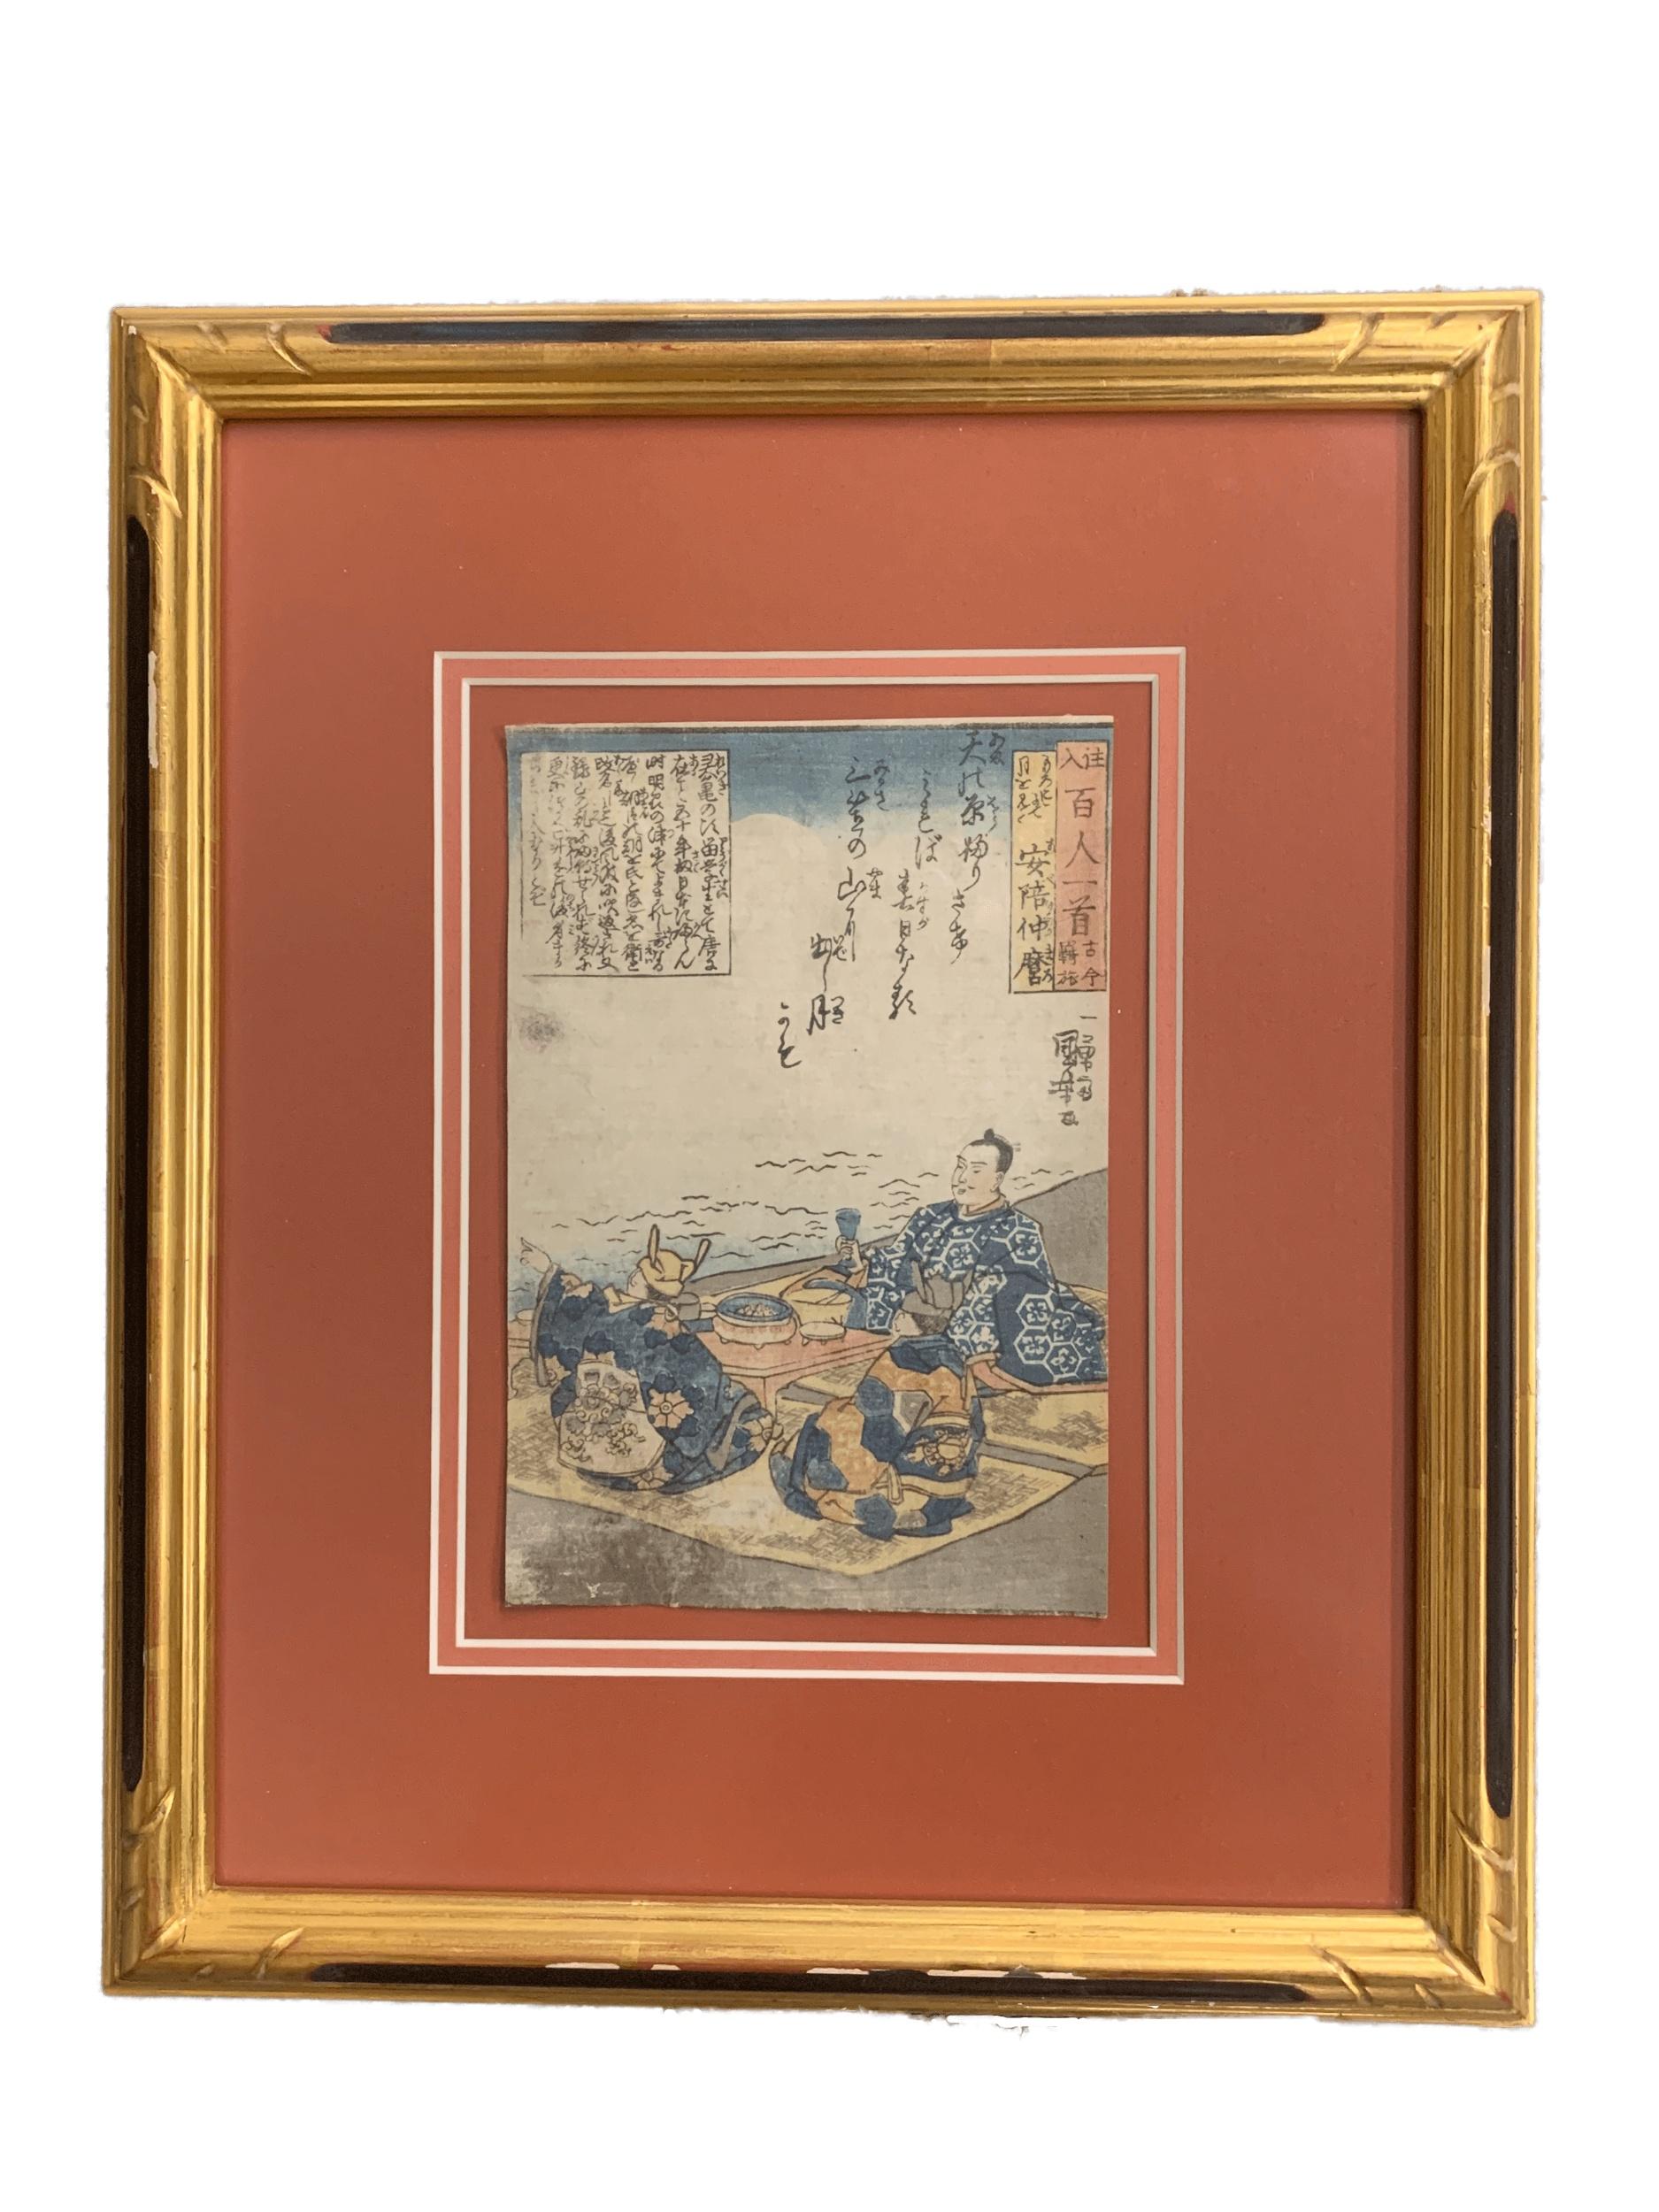 Pair of 19th century Japanese woodblocks by Utagawa Kuniyoshi in custom frames. Each set in a custom matted ebony and gilt decorated custom frame finely matter. The pair signed and dated on reversed.
-Three Courtman drinking sake and admiring the